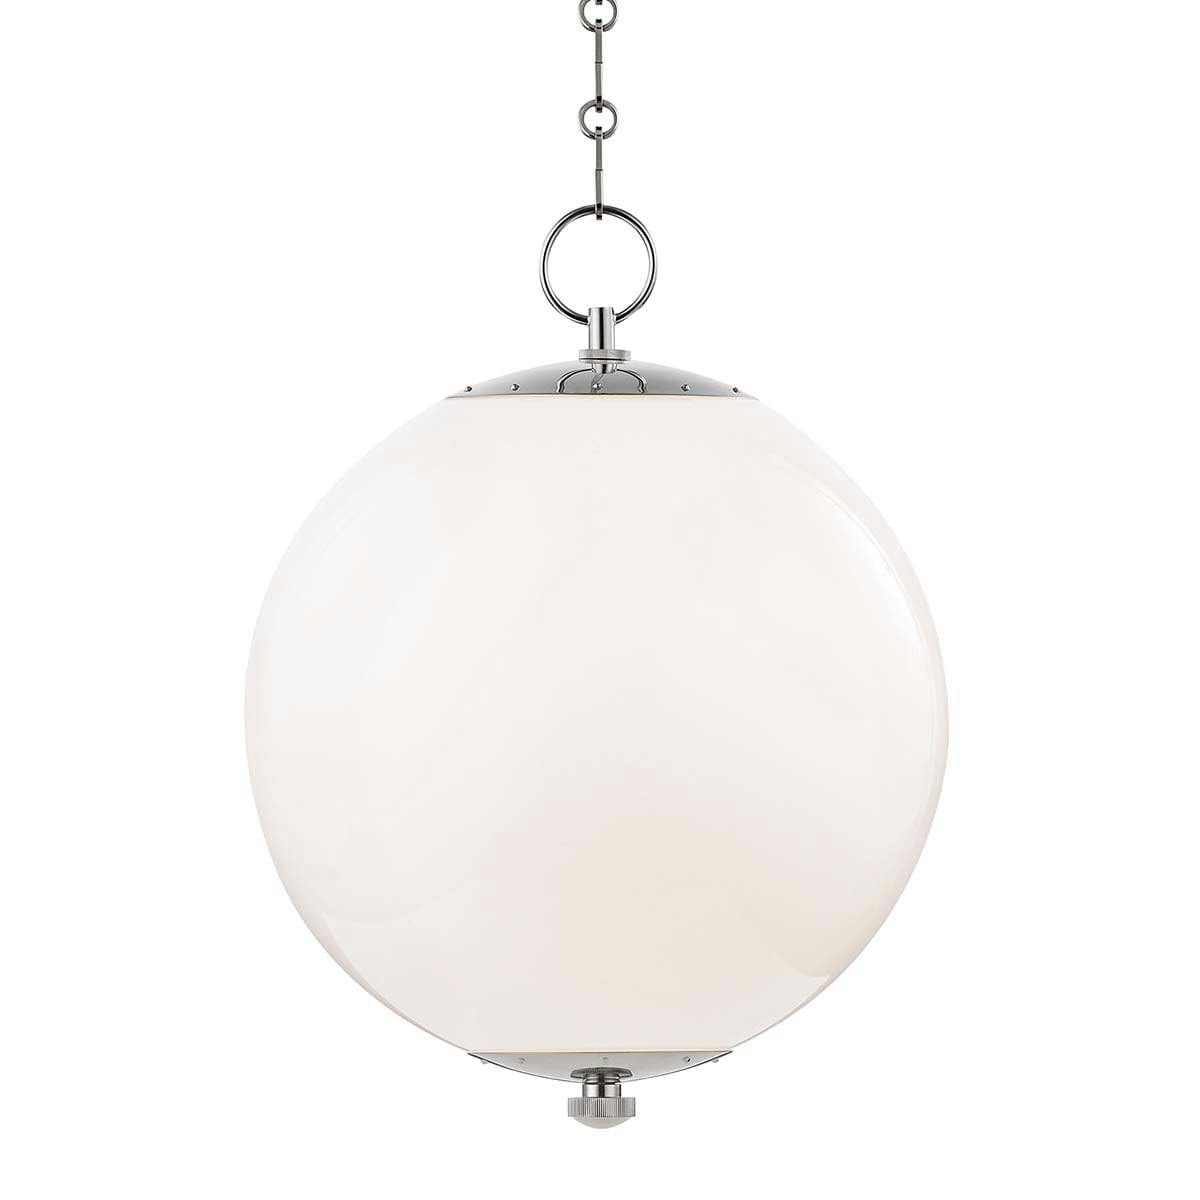 Antora 16" Polished Nickel Glass Dimmable Pendant